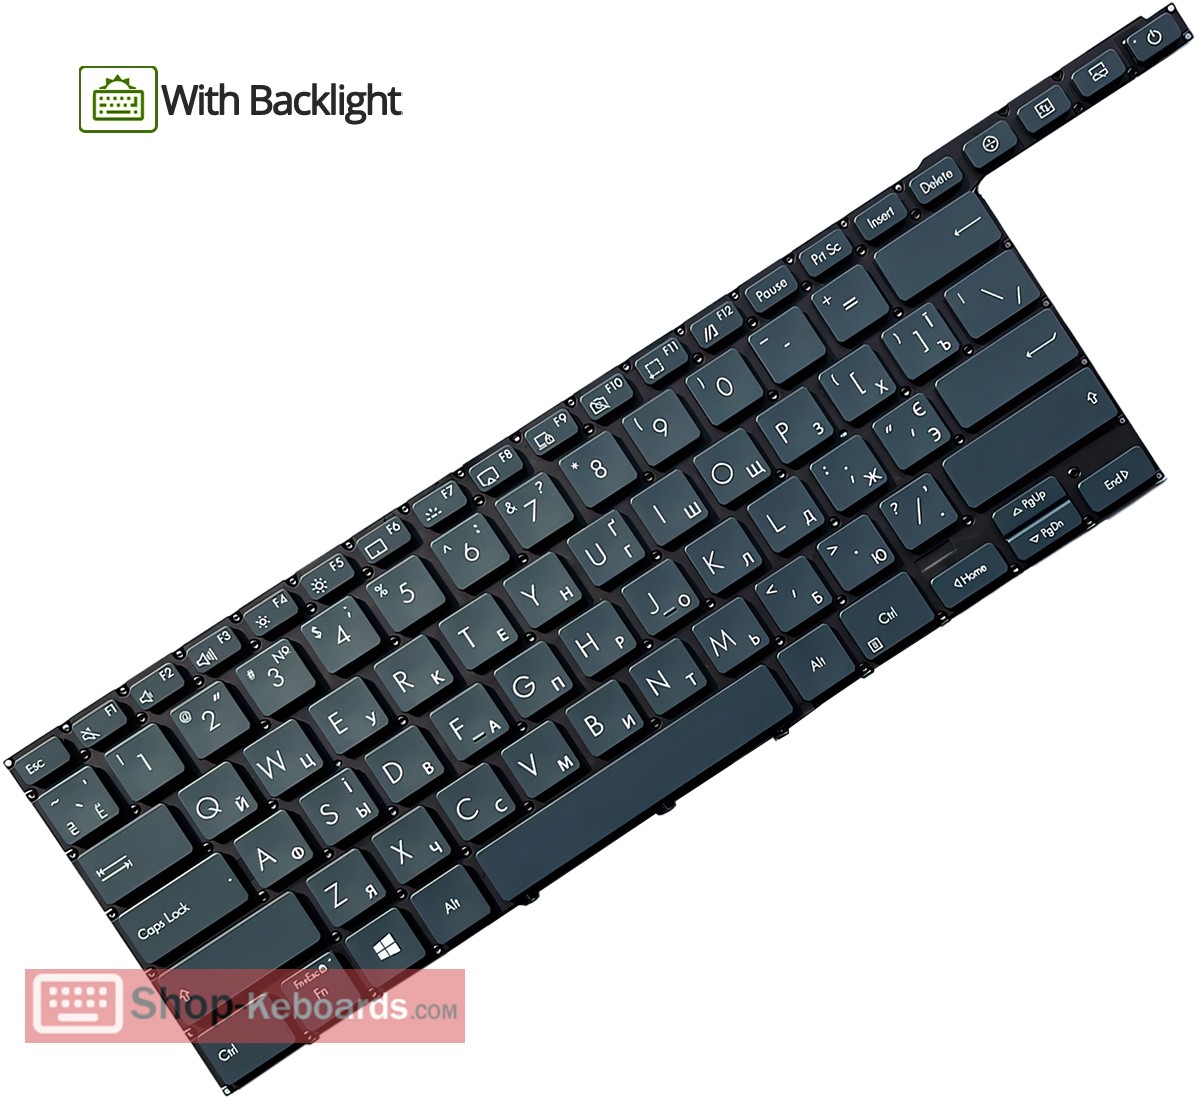 Asus 0KNB0-6823US00 Keyboard replacement